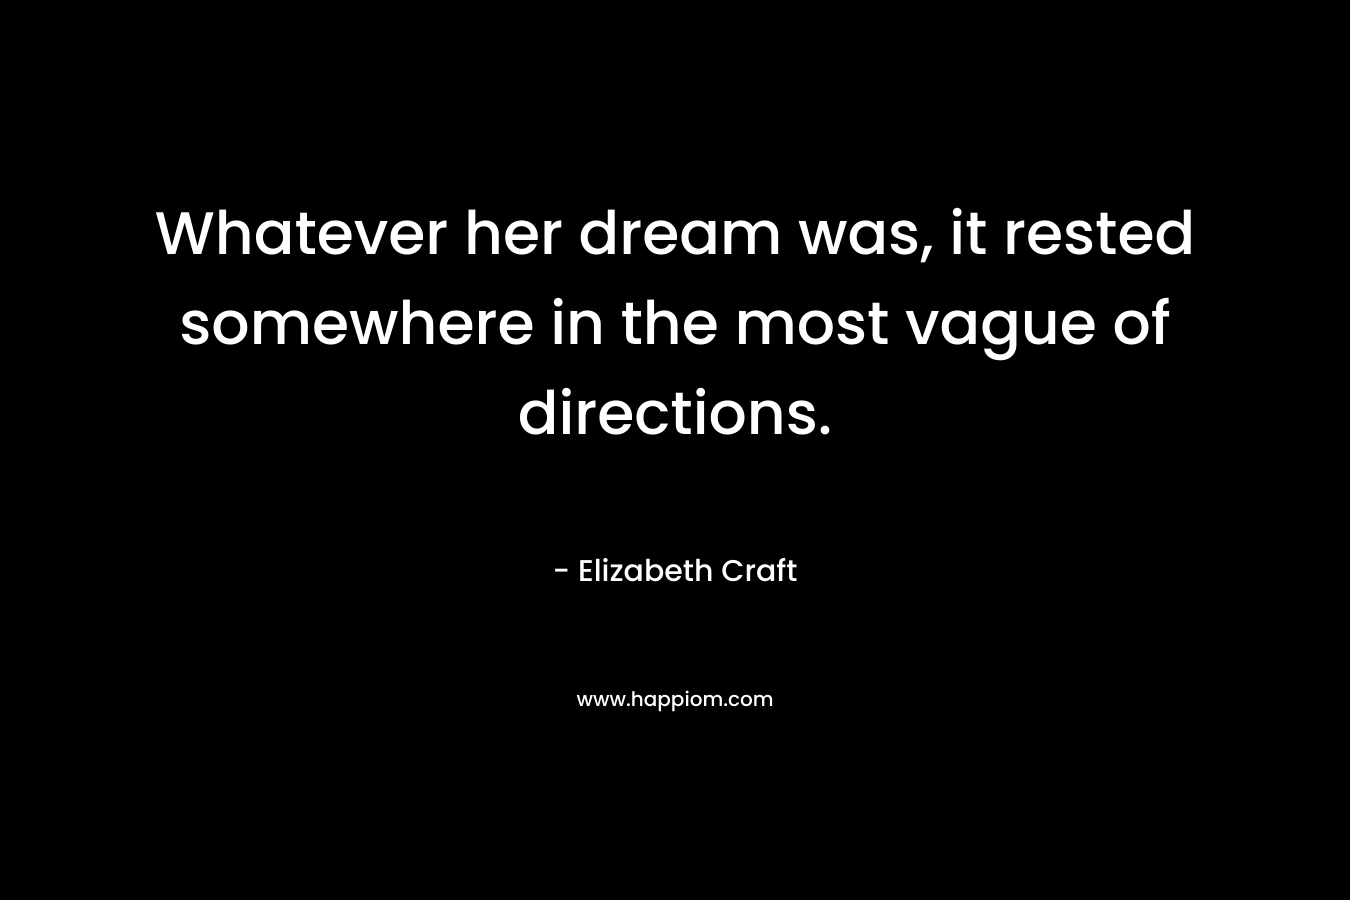 Whatever her dream was, it rested somewhere in the most vague of directions. – Elizabeth Craft